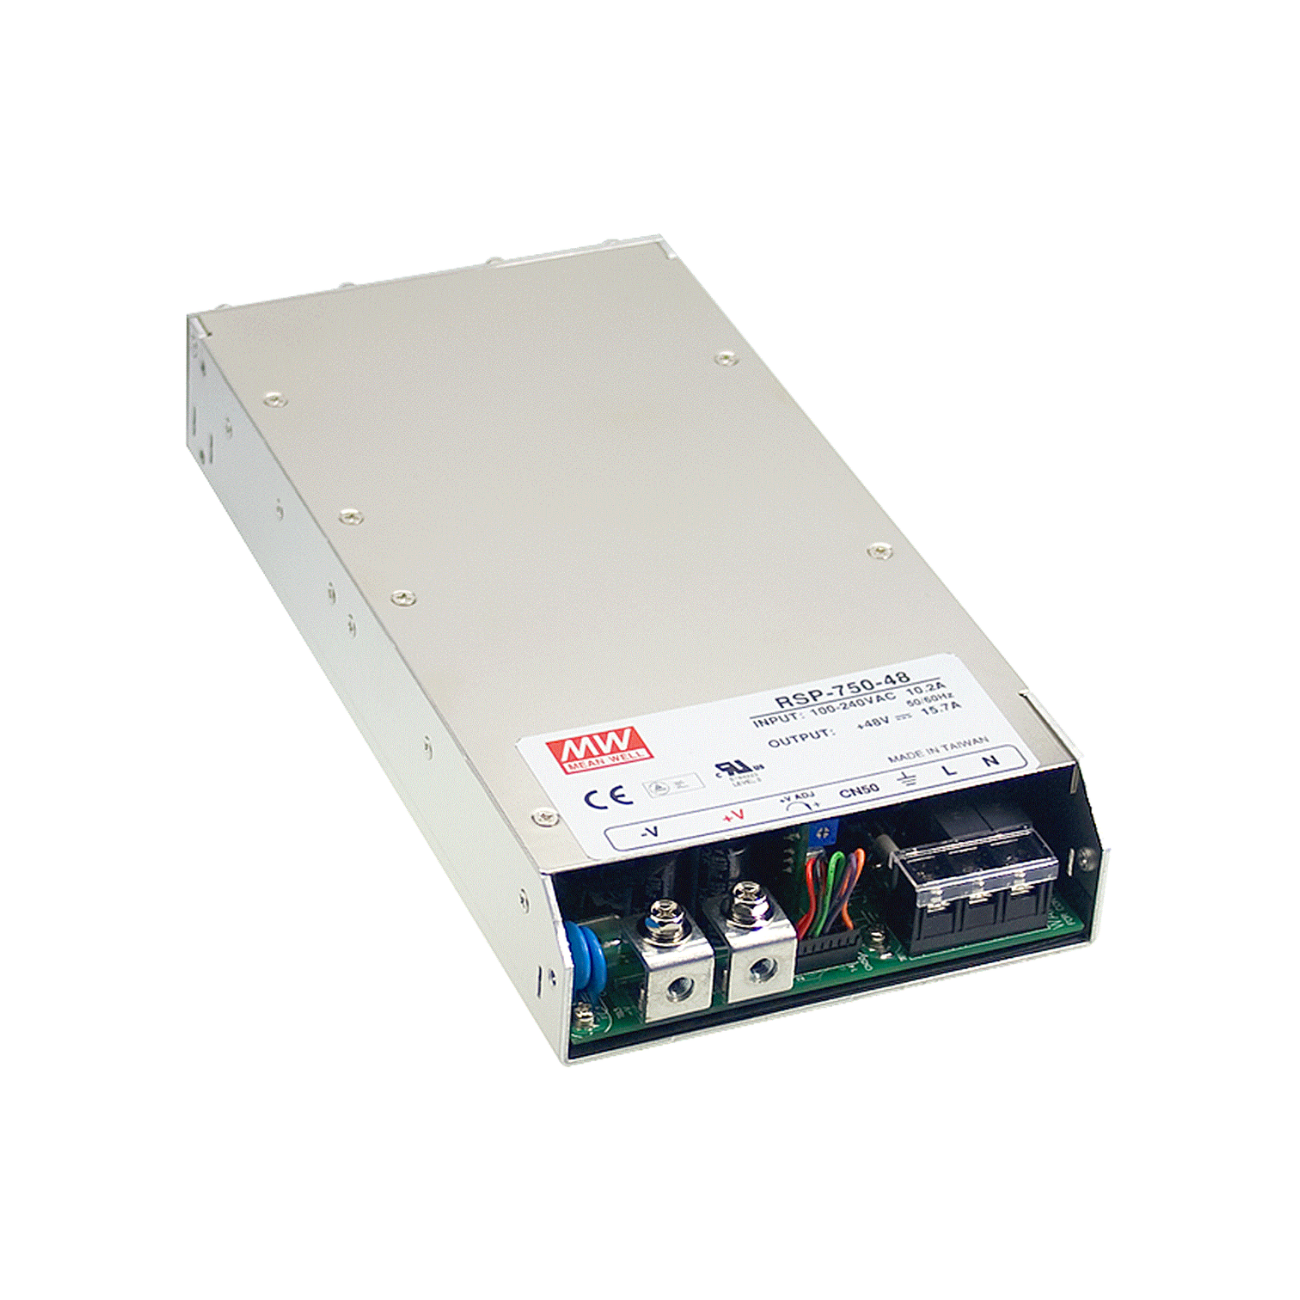 Industrienetzteil MeanWell RSP-750-48 / RSP-750-Serie